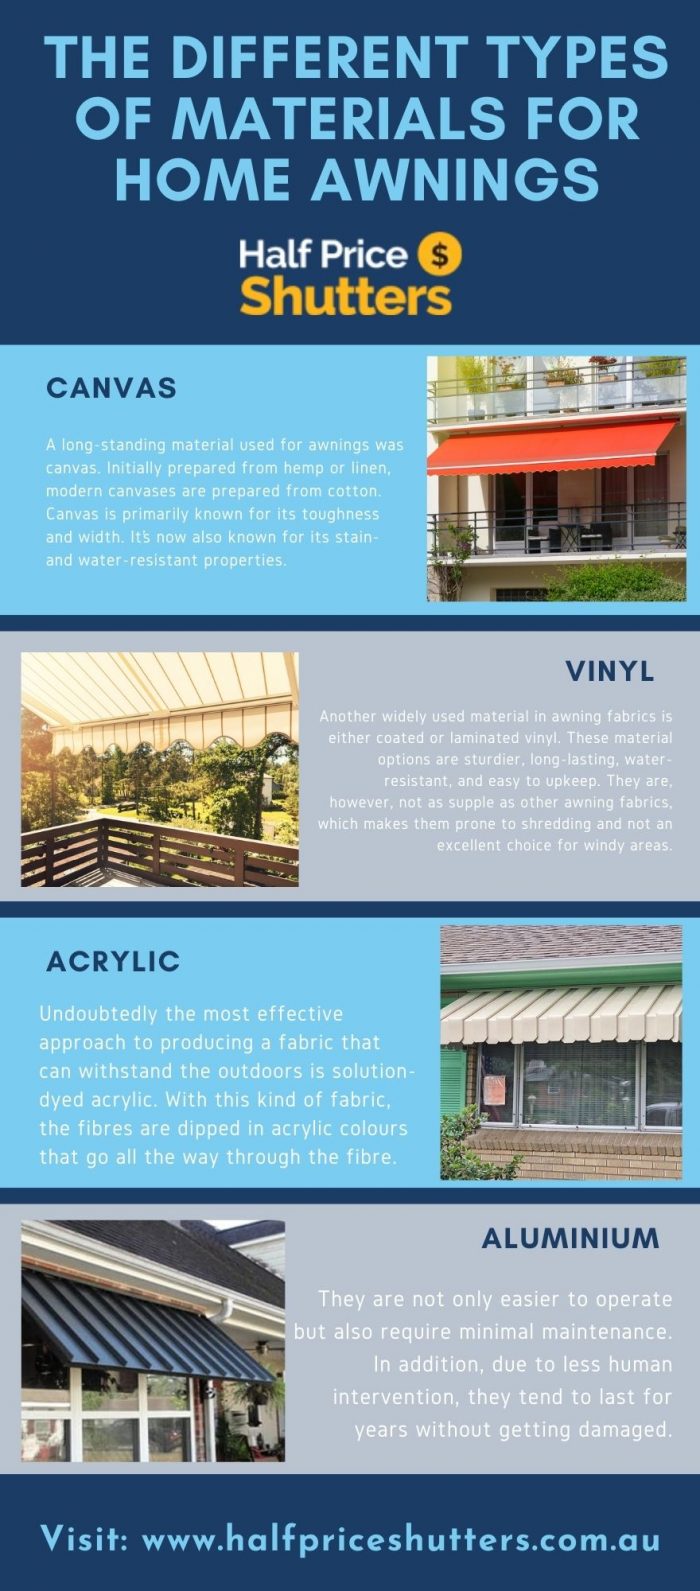 The Different Types of Materials for Home Awnings